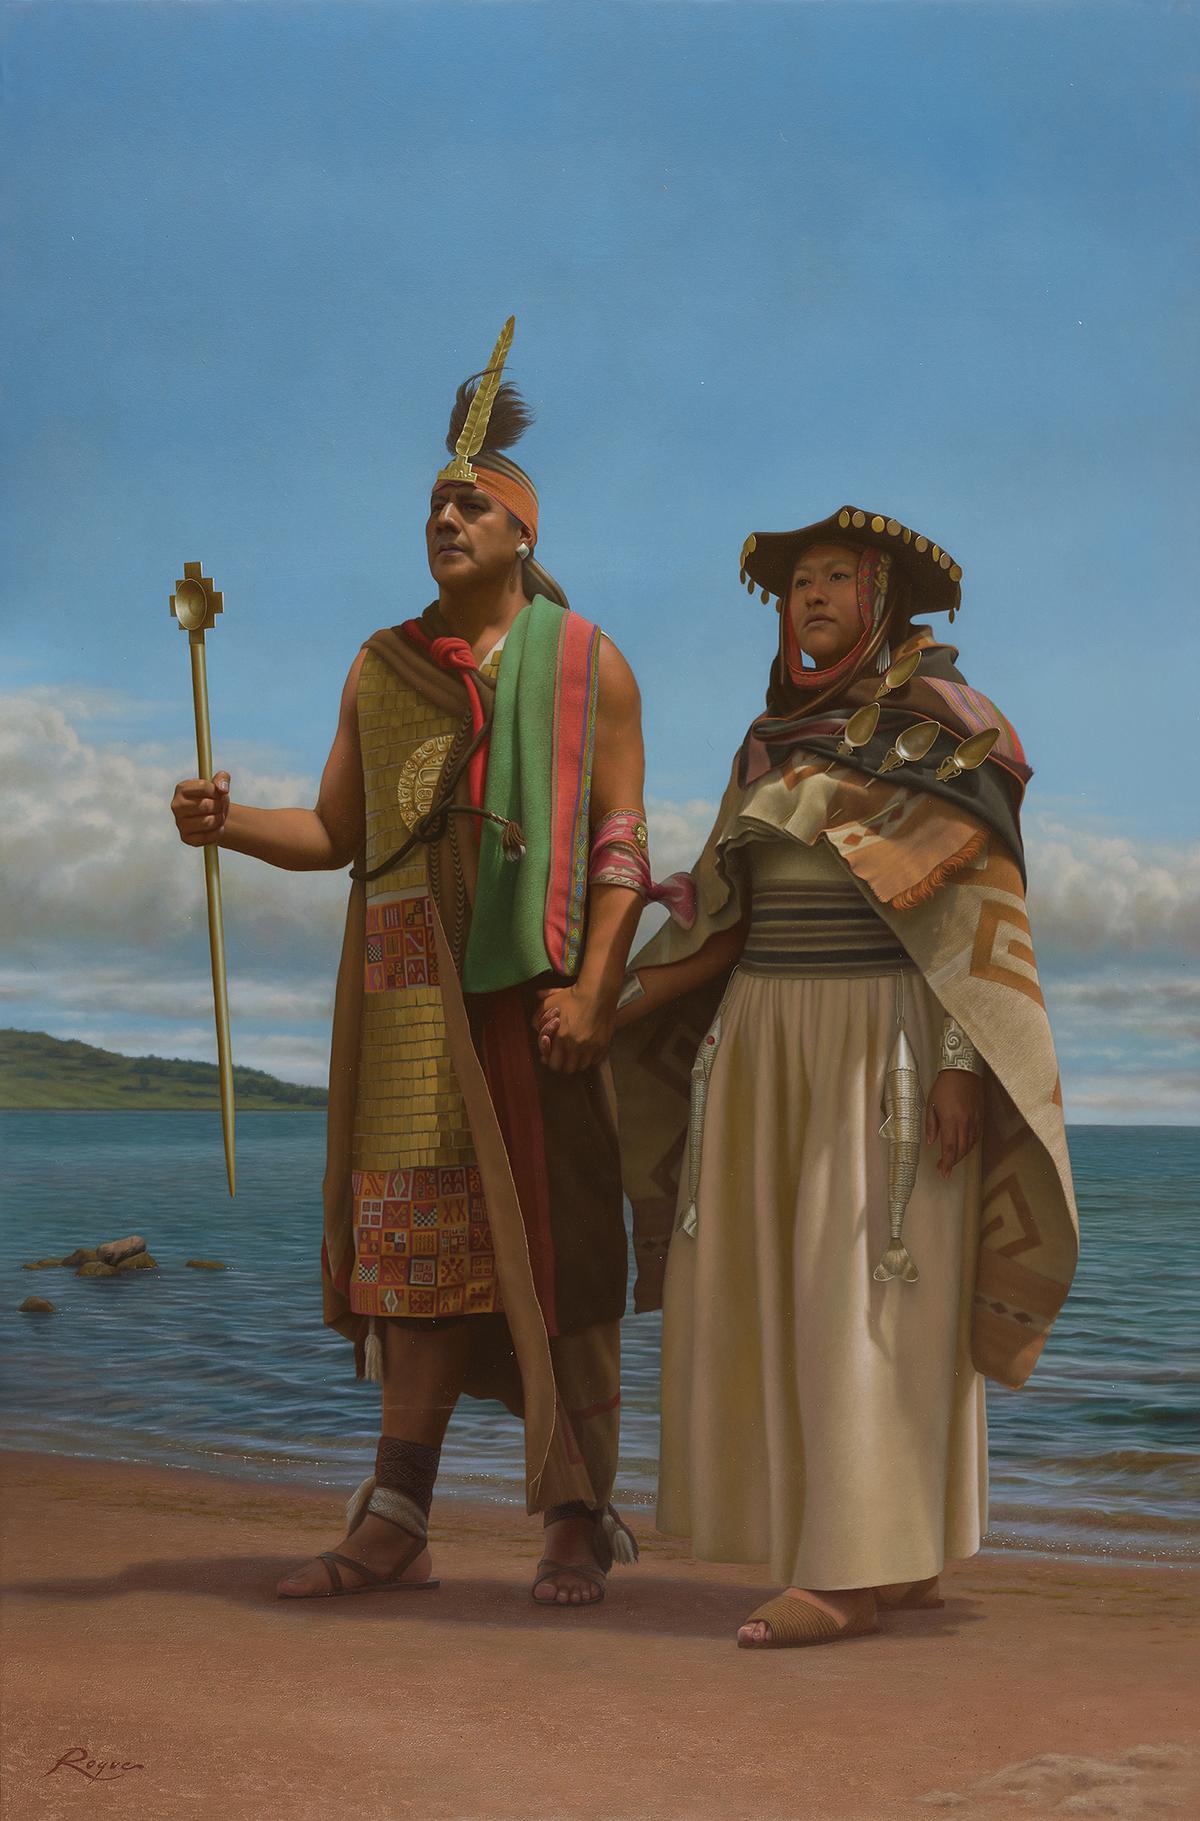 The bronze award-winning work “Origin” by Pablo Josué Roque Almanza of Peru. Oil on Canvas; 86 2/8 inches by 58 6/8 inches. (NTD International Figure Painting Competition)